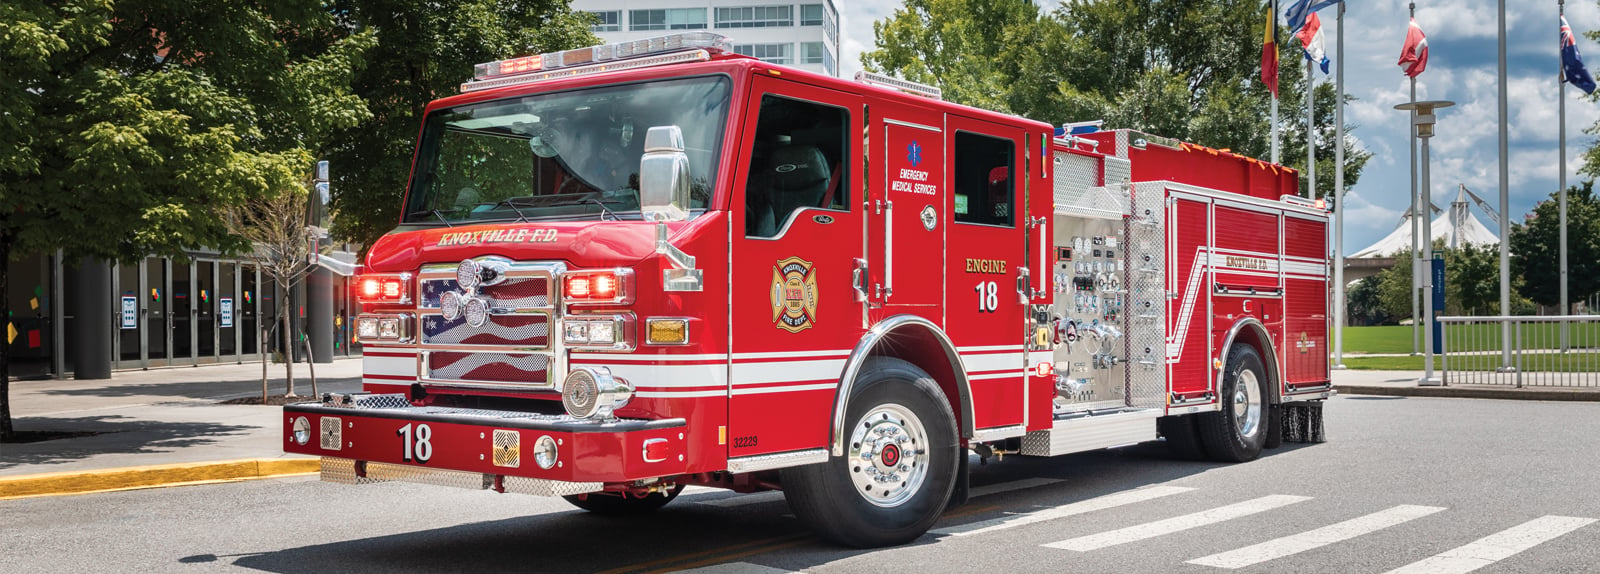 Types of Fire Trucks: An Overview Comparison